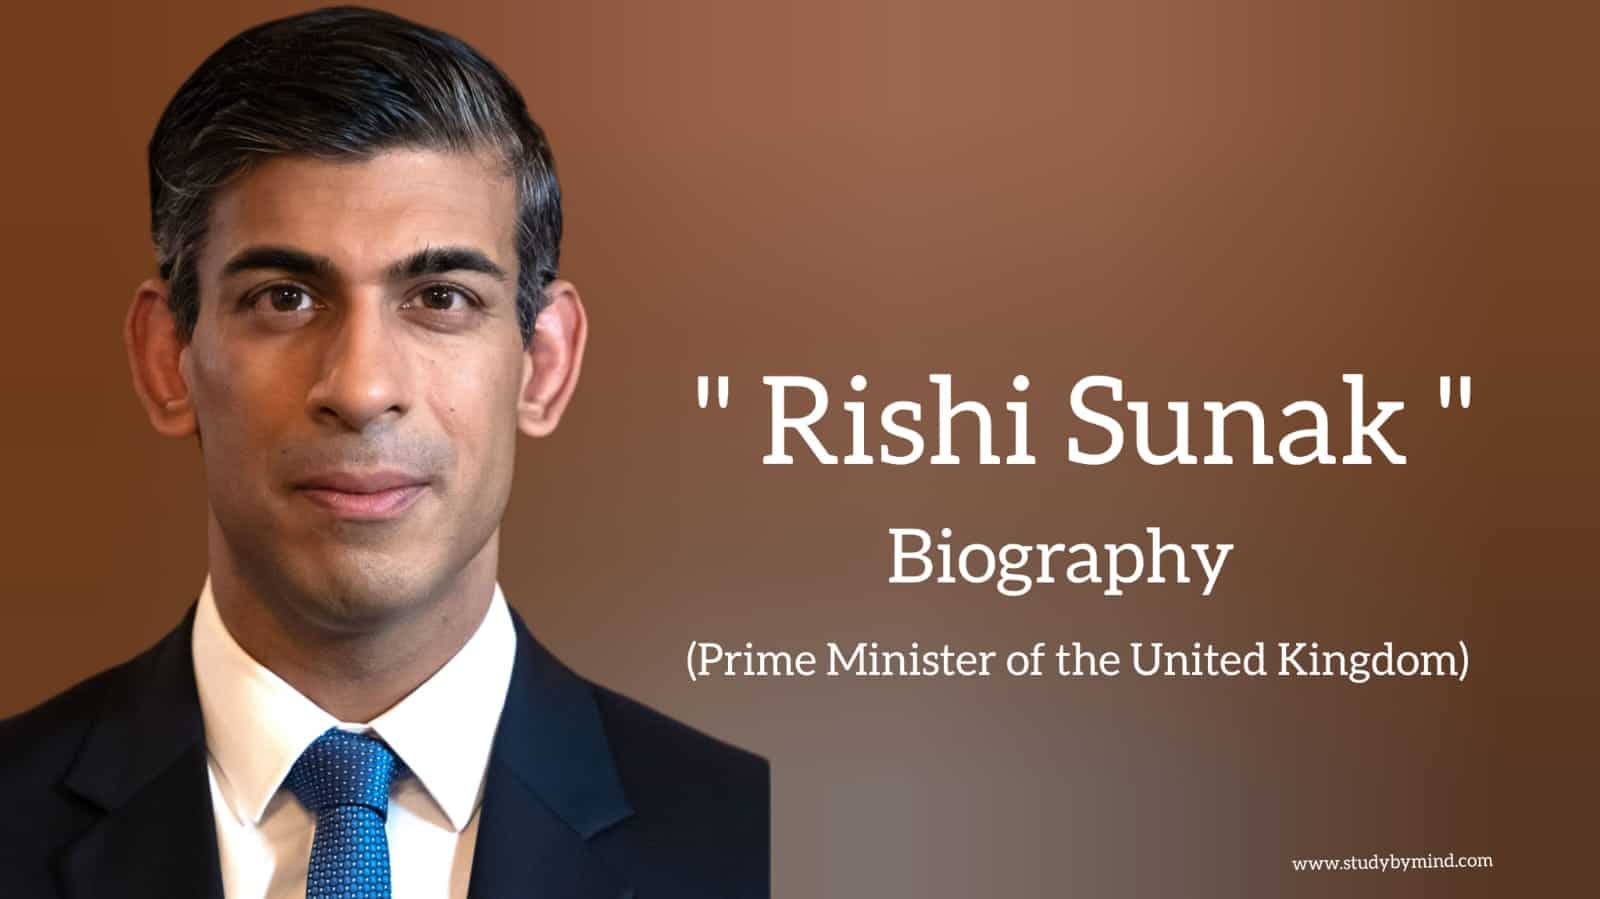 You are currently viewing Rishi sunak biography in english (Prime Minister of the United Kingdom)